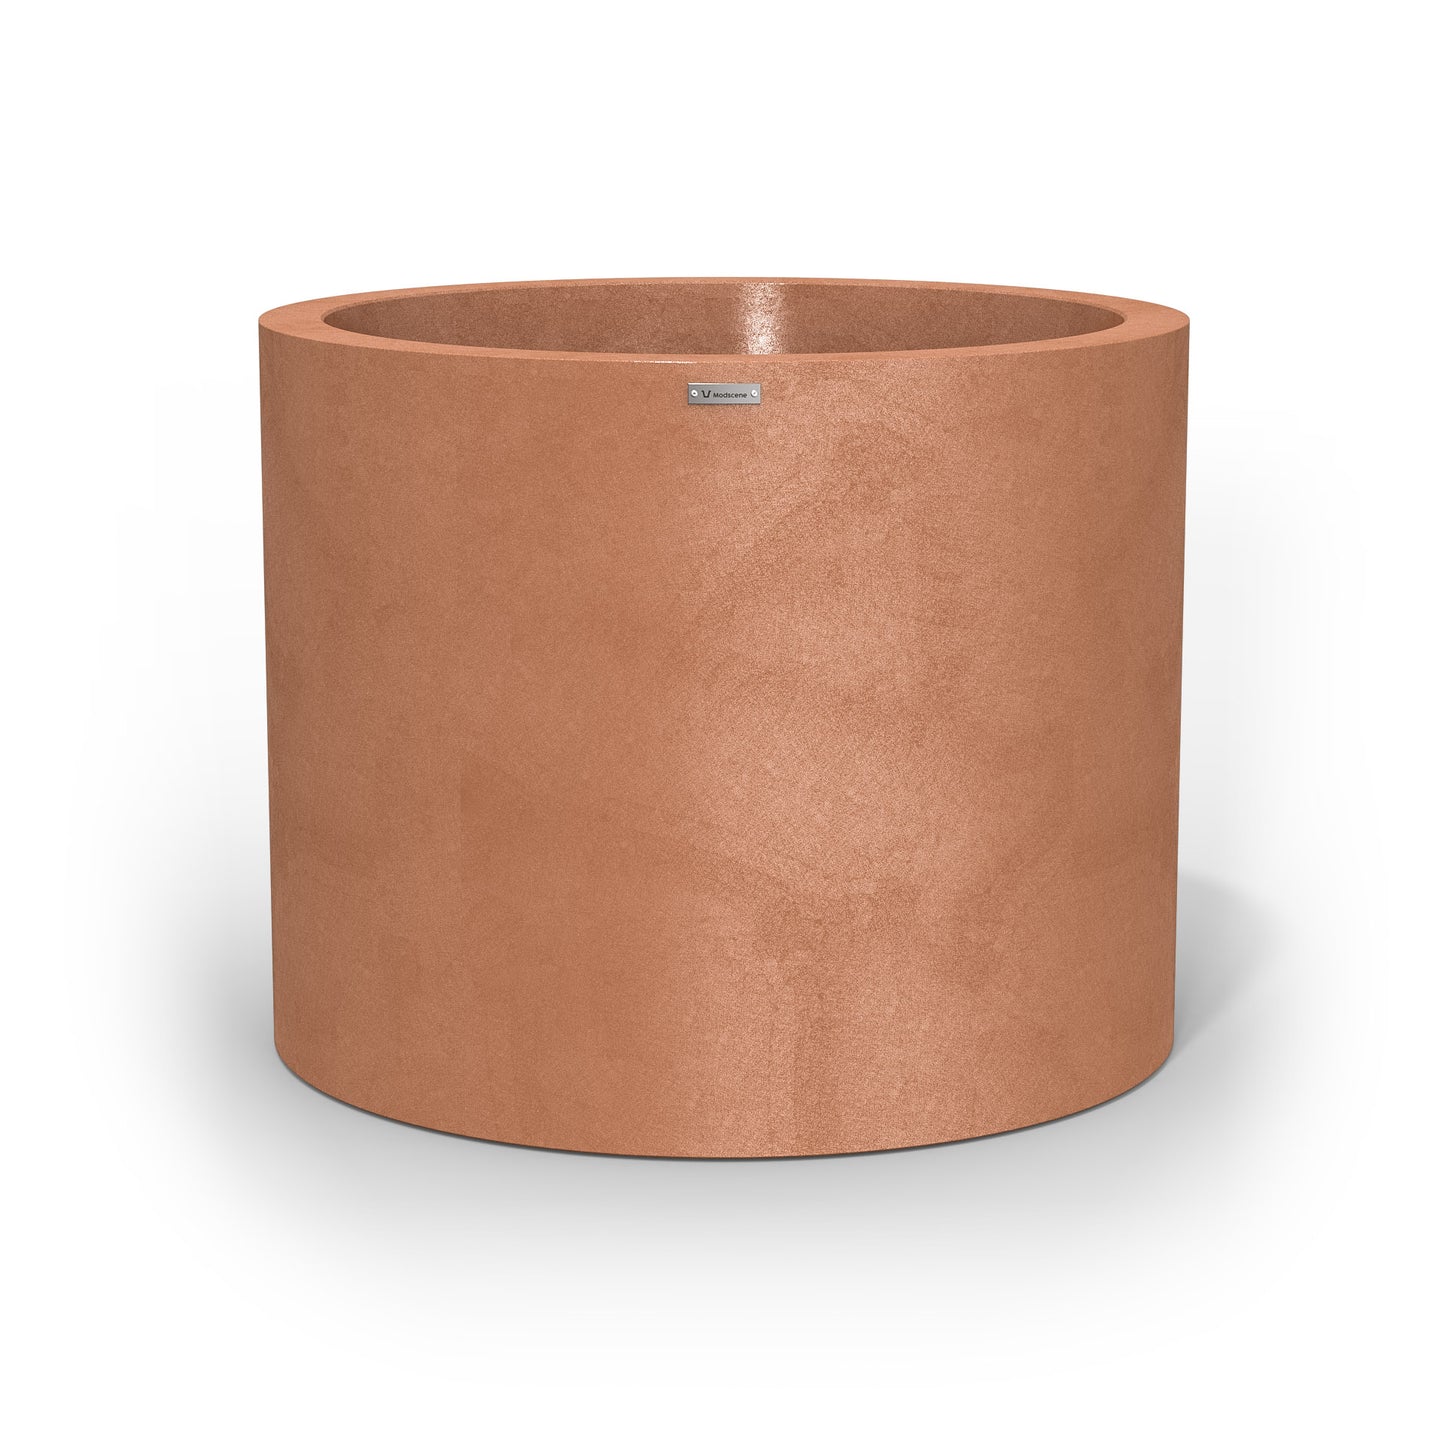 A giant cylinder pot planter in a rustic terracotta colour. Made in NZ.